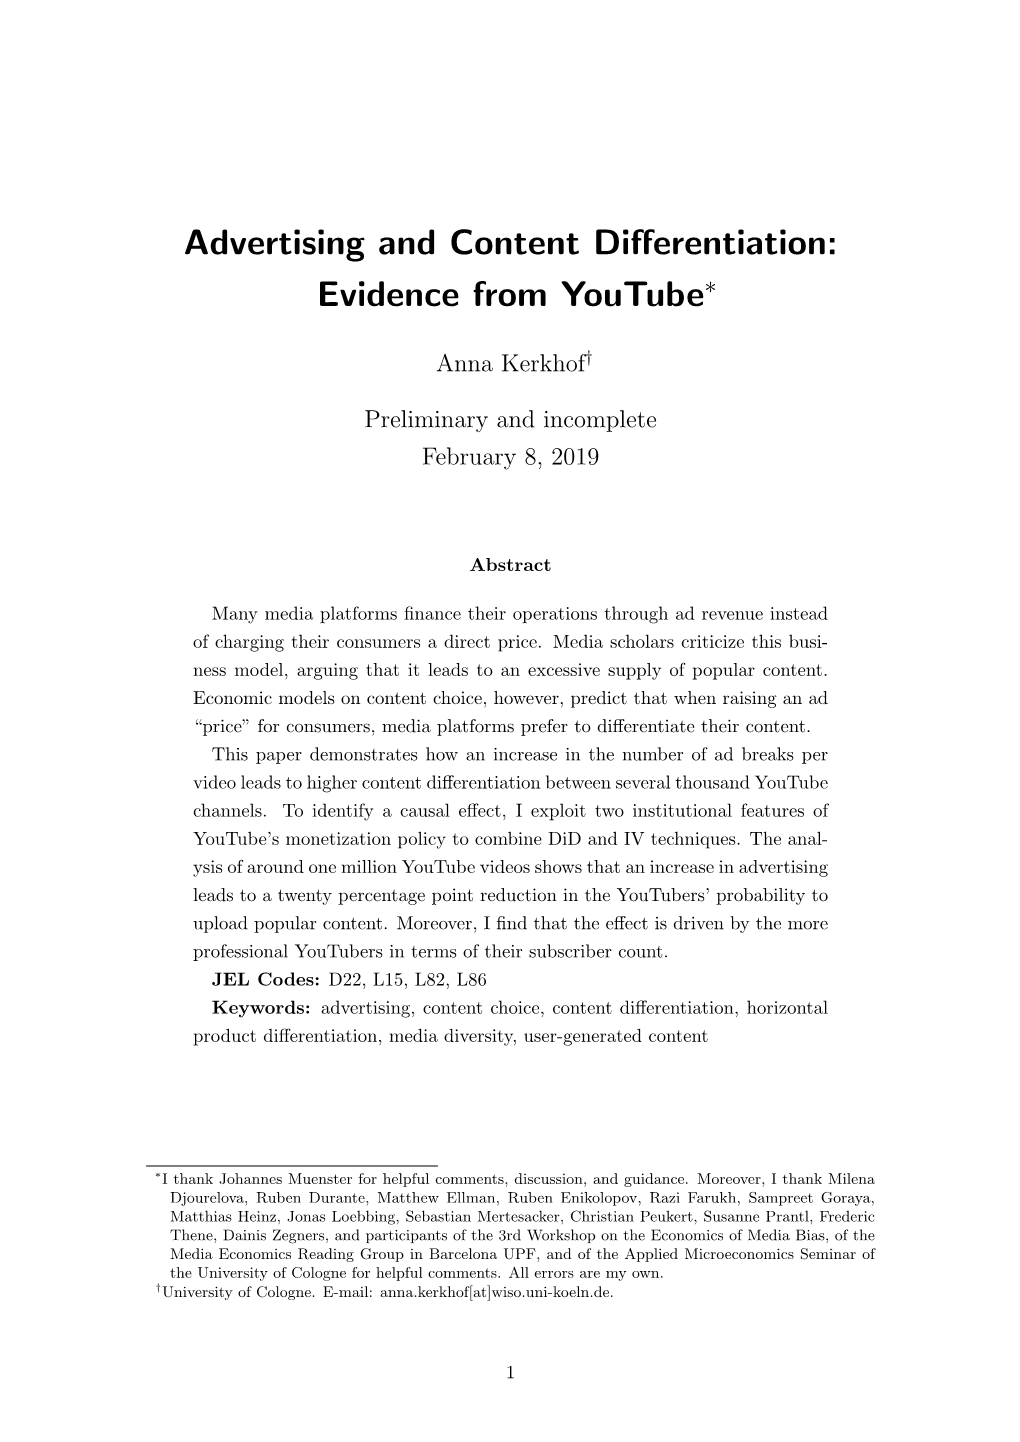 Advertising and Content Differentiation: Evidence From